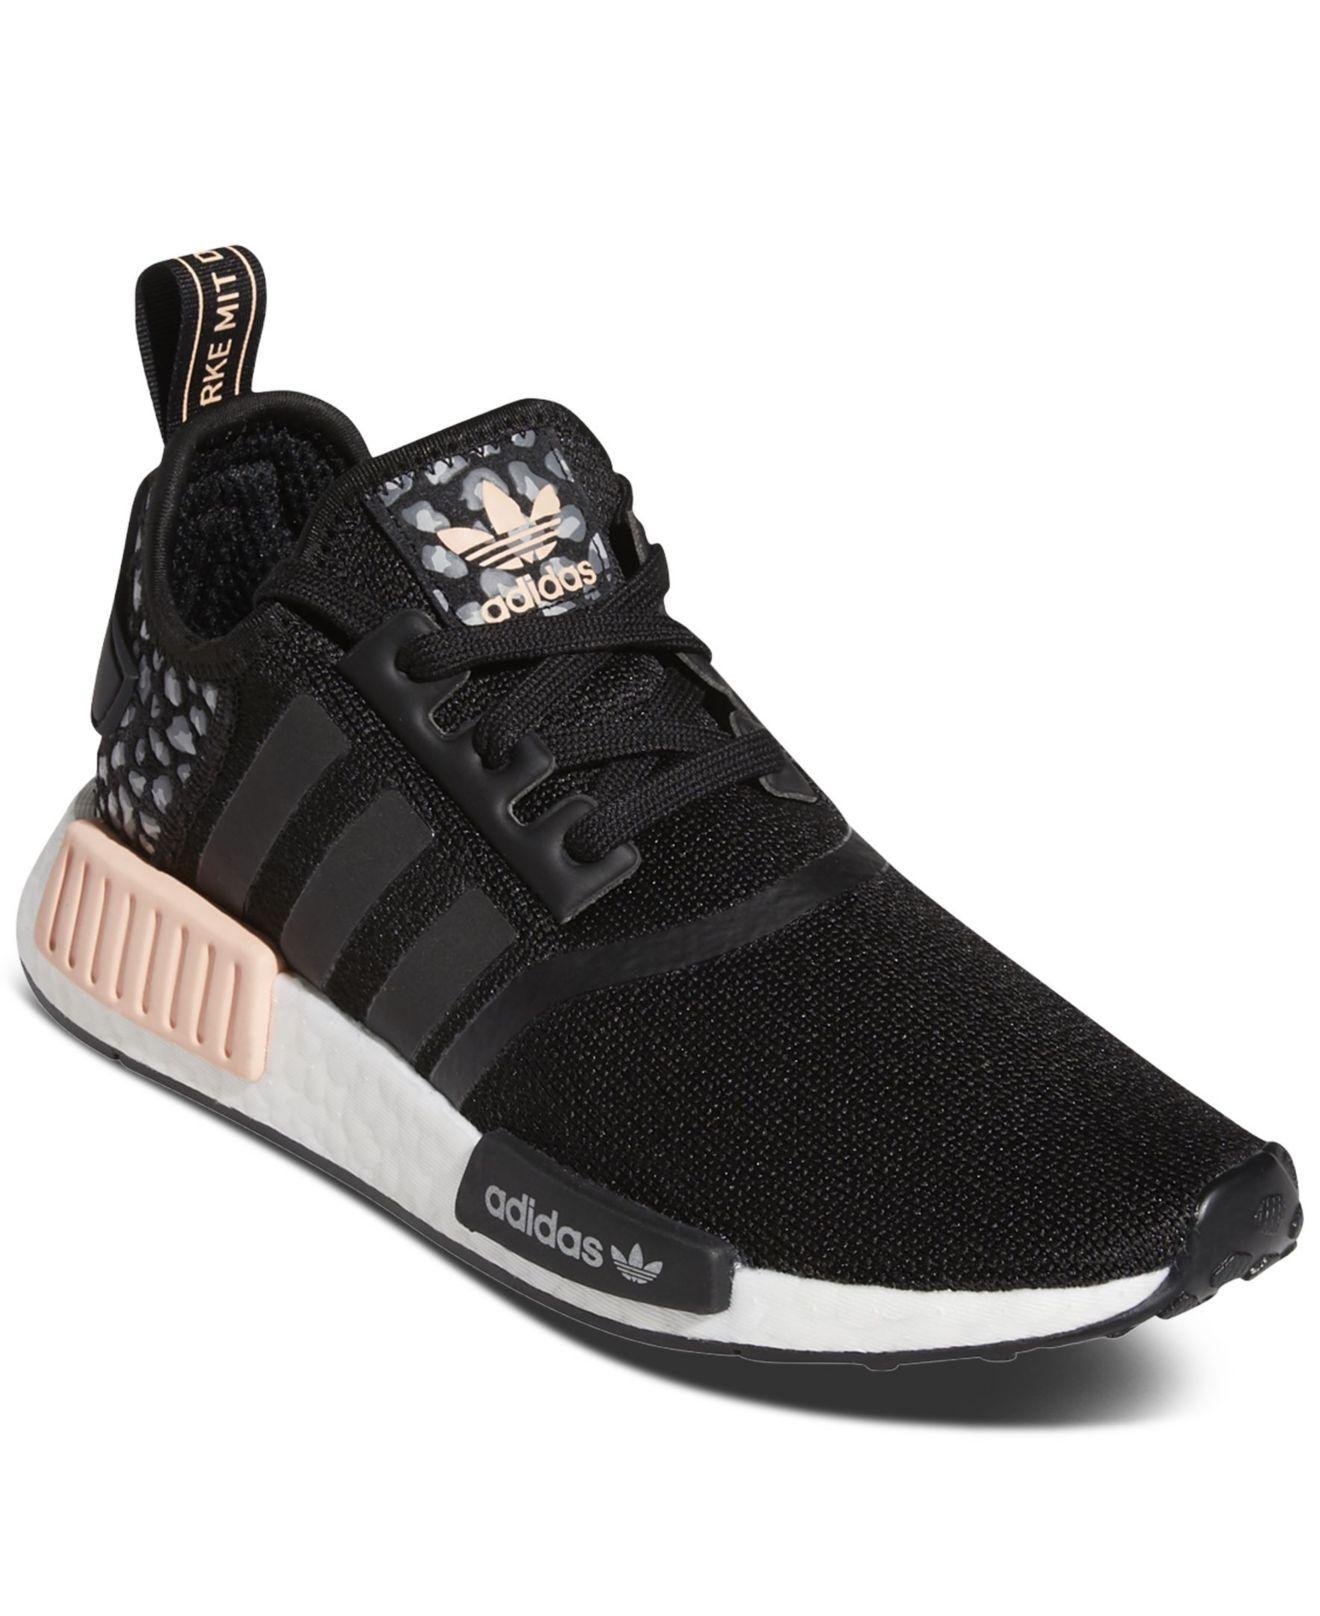 Blacken Ideelt Recept adidas Nmd R1 Animal Print Casual Sneakers From Finish Line in Black | Lyst